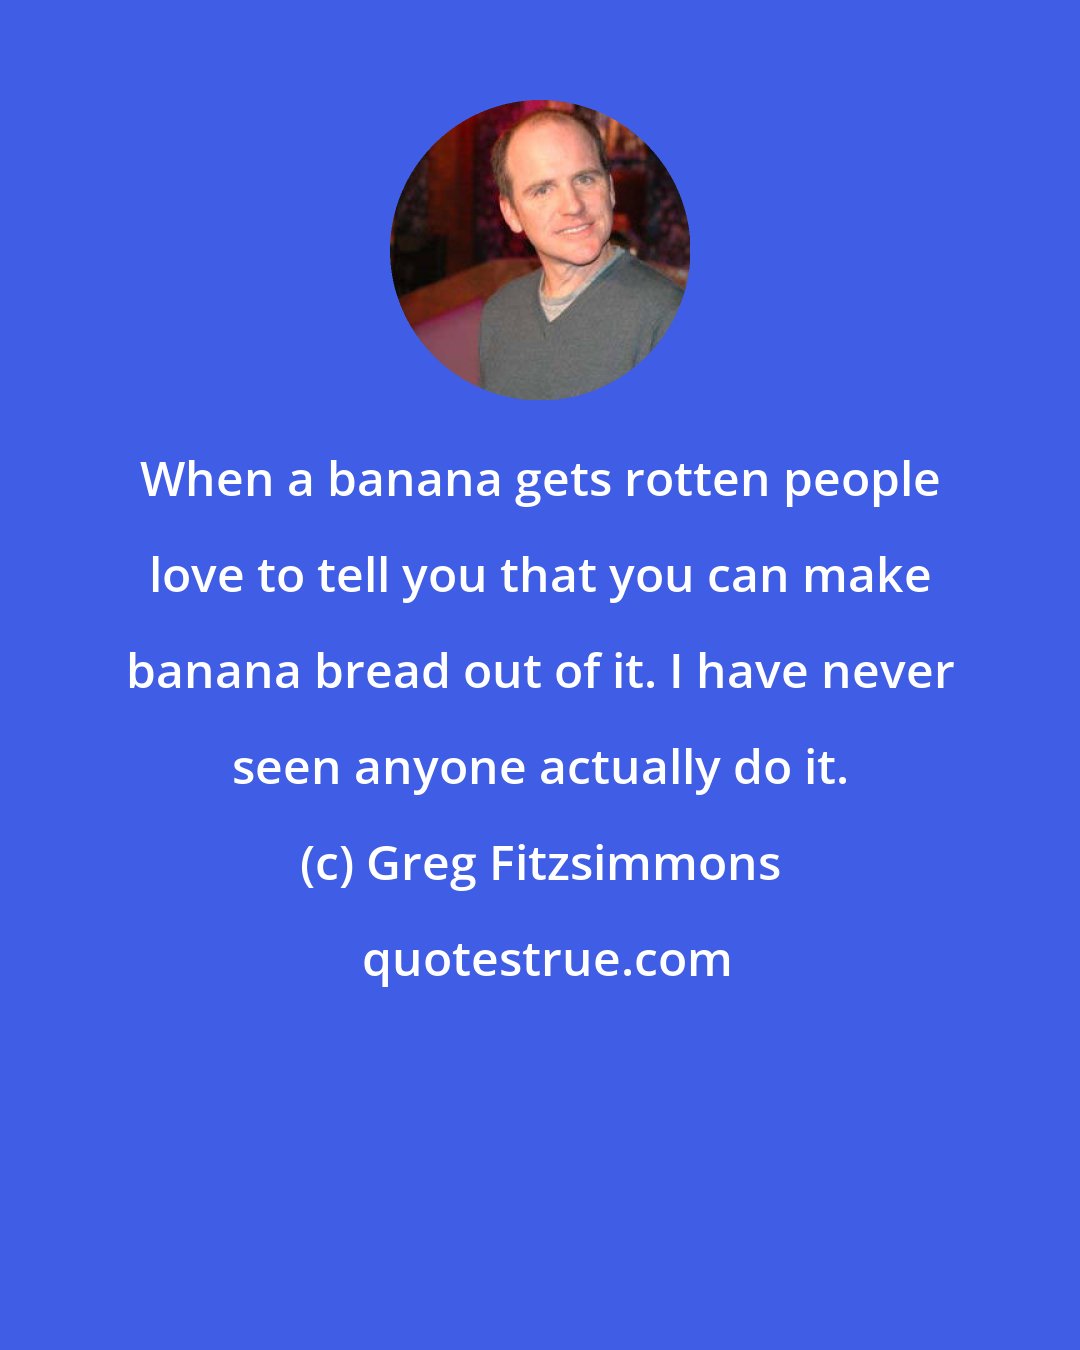 Greg Fitzsimmons: When a banana gets rotten people love to tell you that you can make banana bread out of it. I have never seen anyone actually do it.